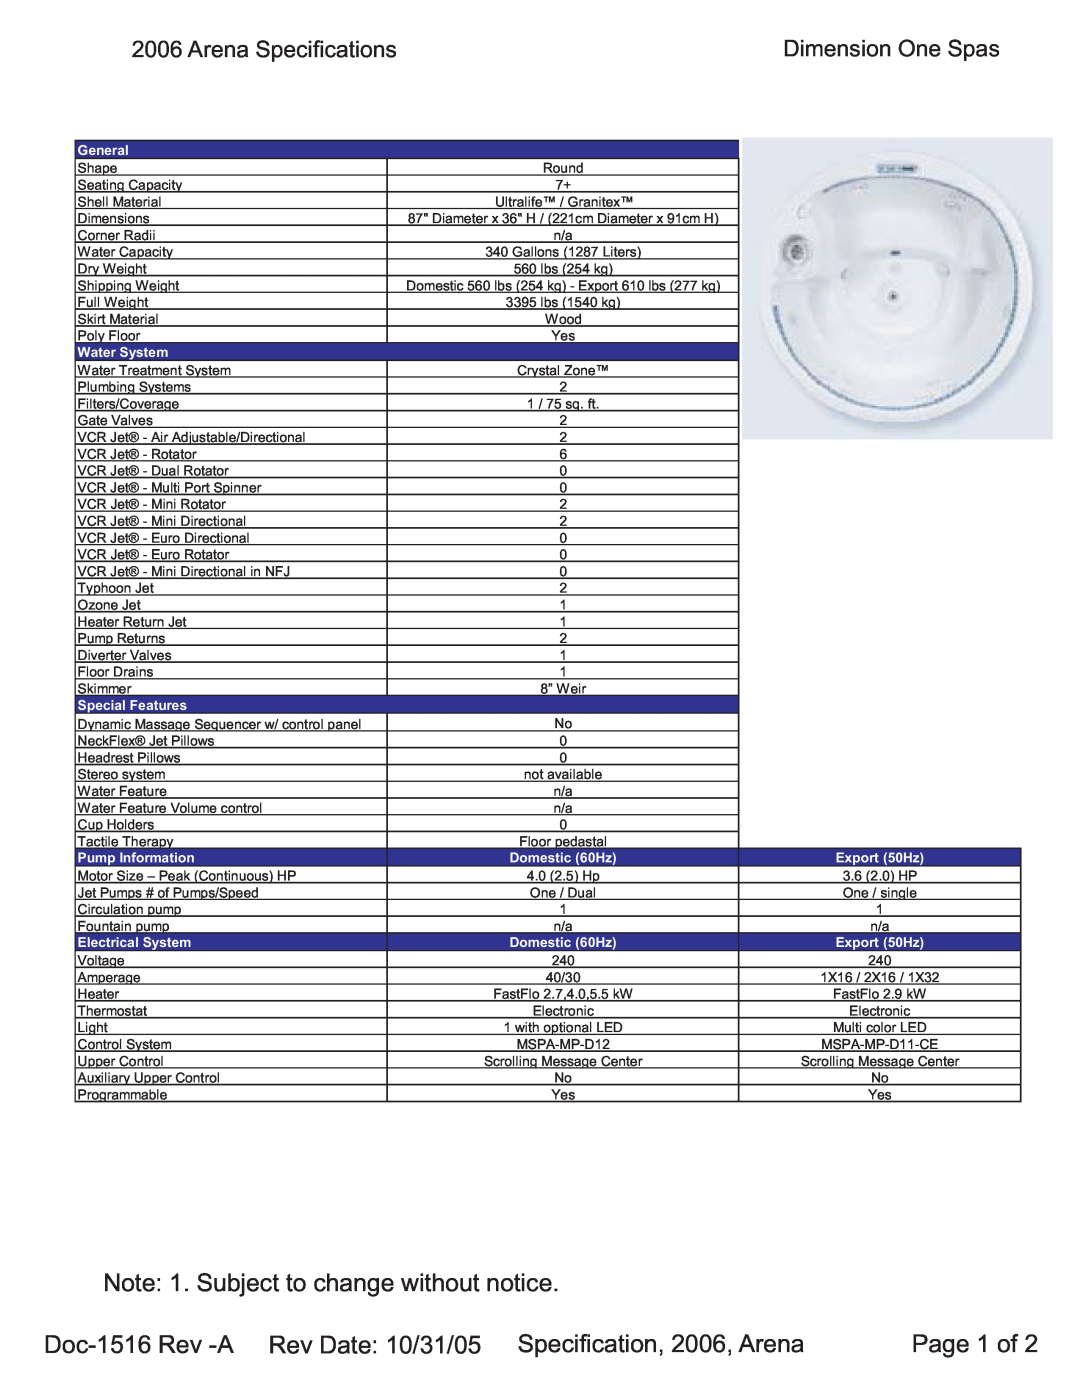 Dimension One Spas Arena specifications Note 1. Subject to change without notice, Page 1 of, General, Water System 